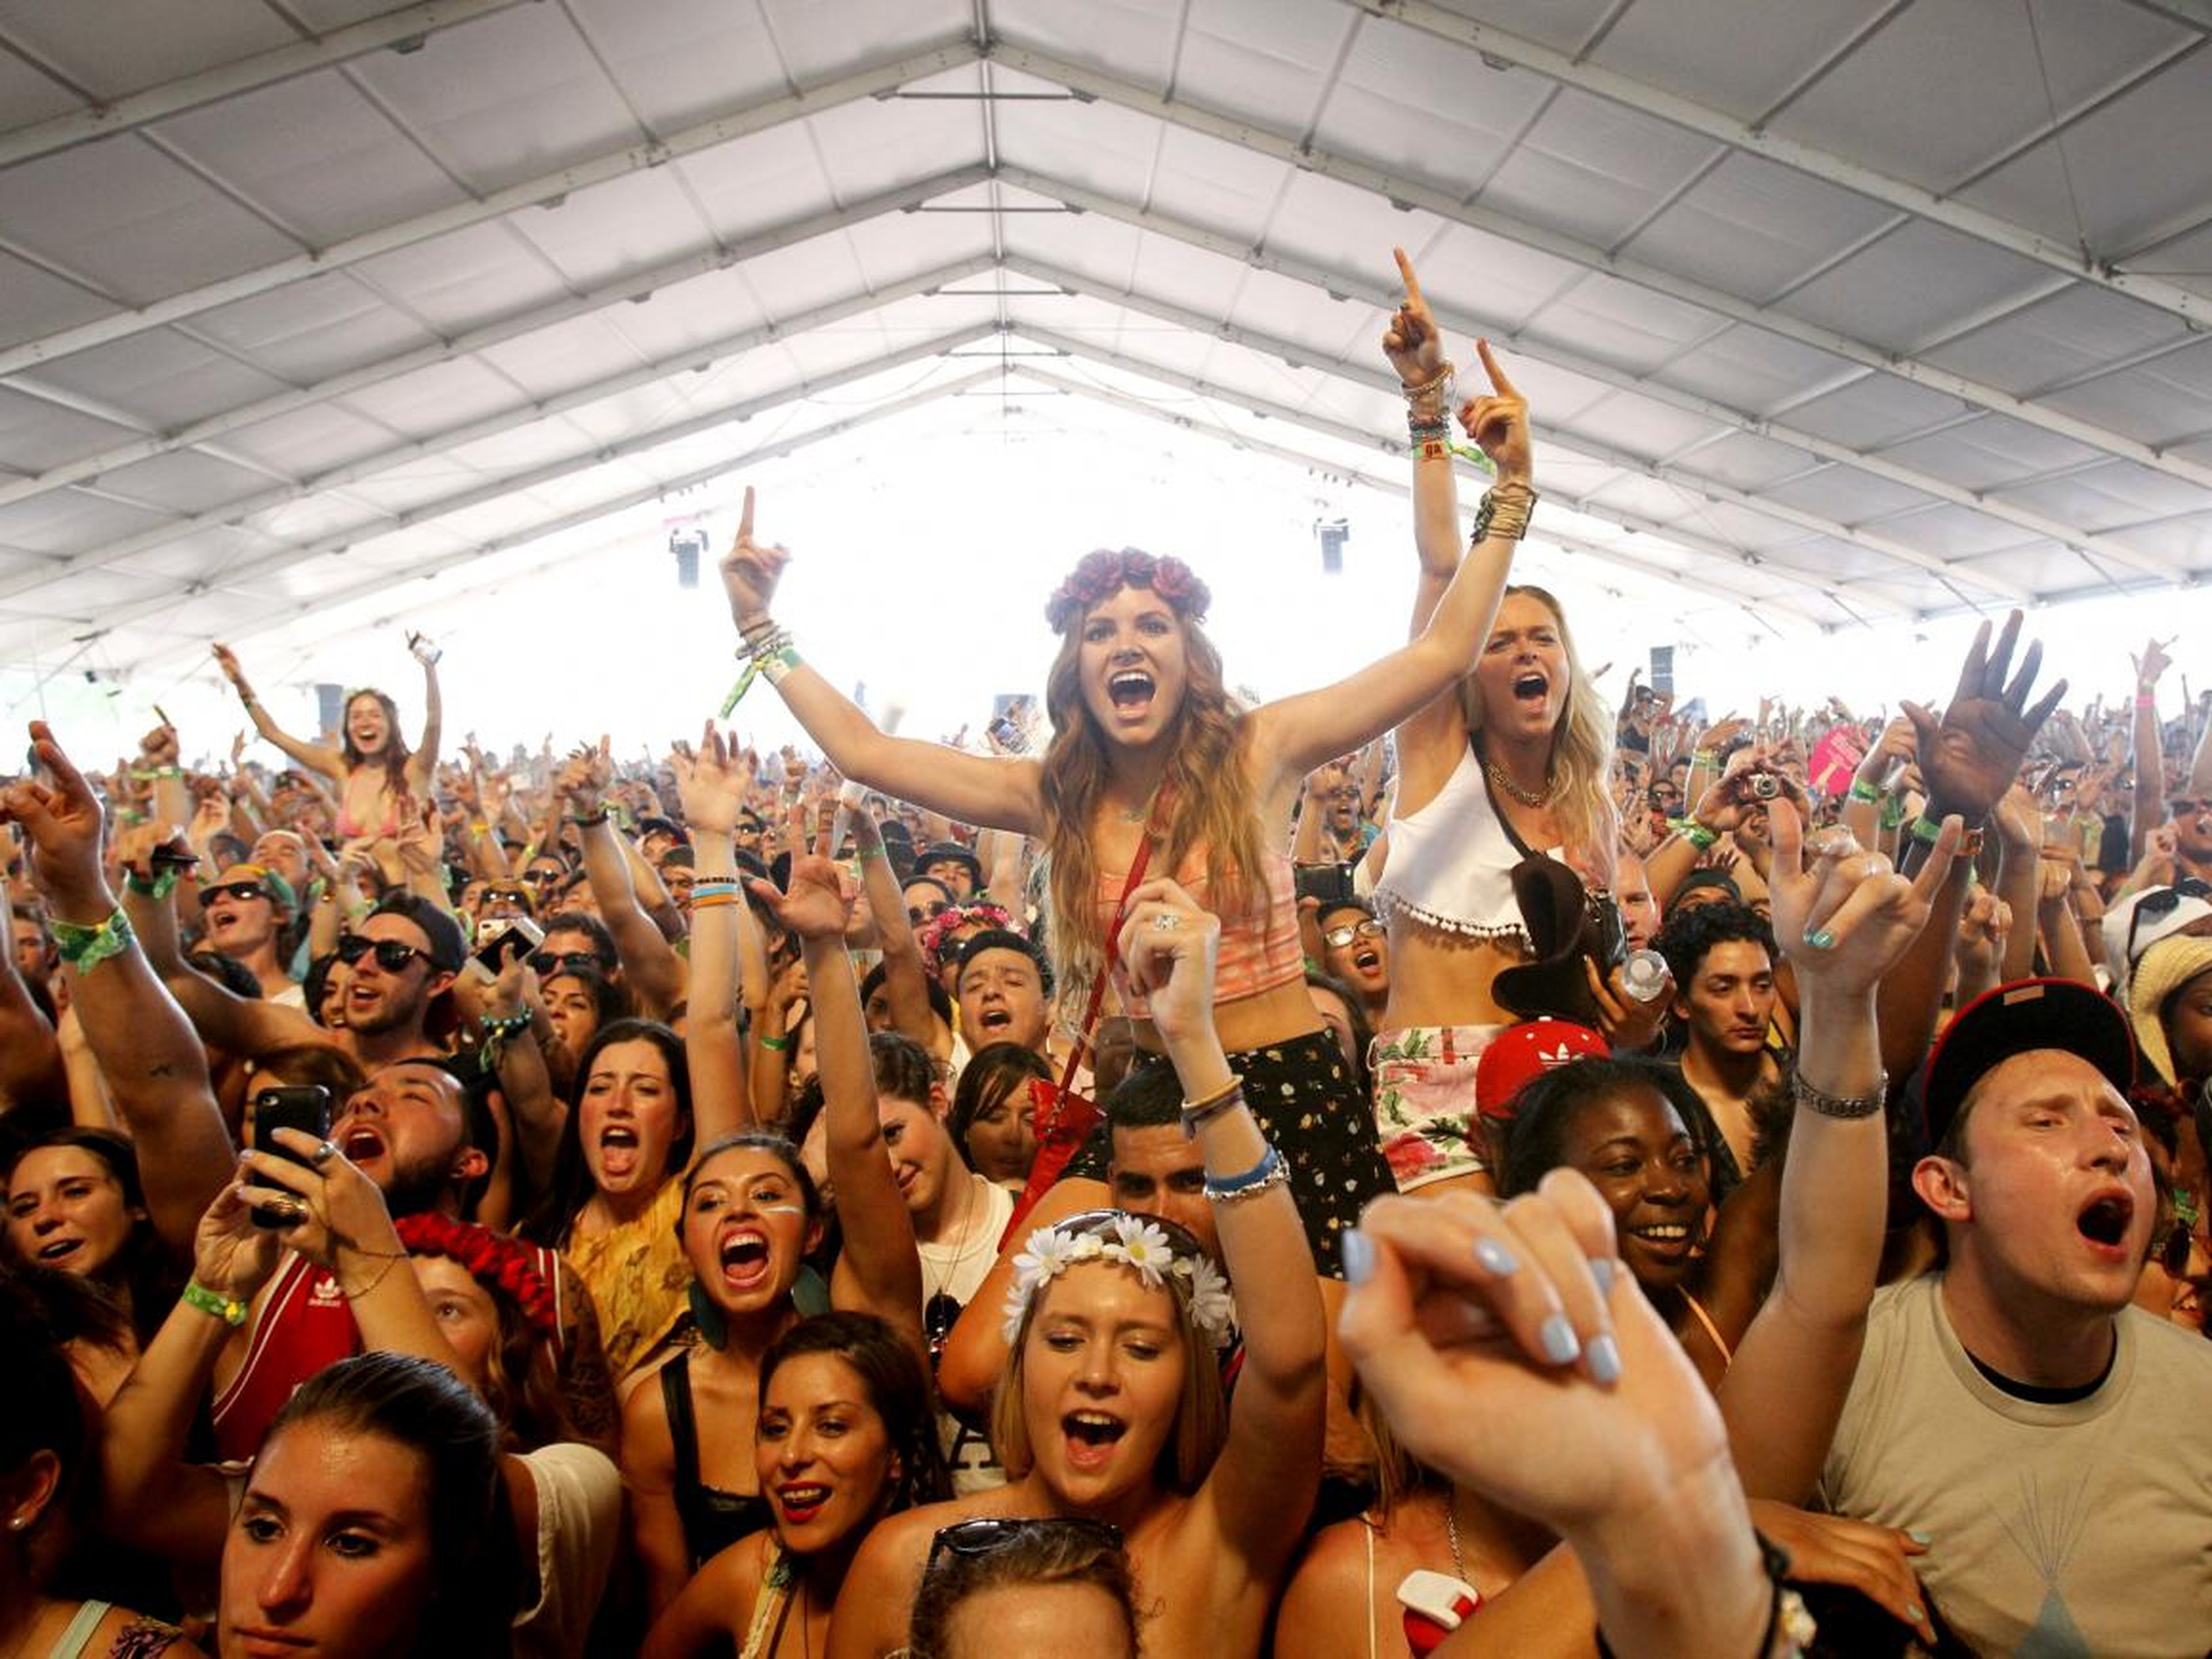 If you're not a fan of crowds, you might want to skip Coachella.